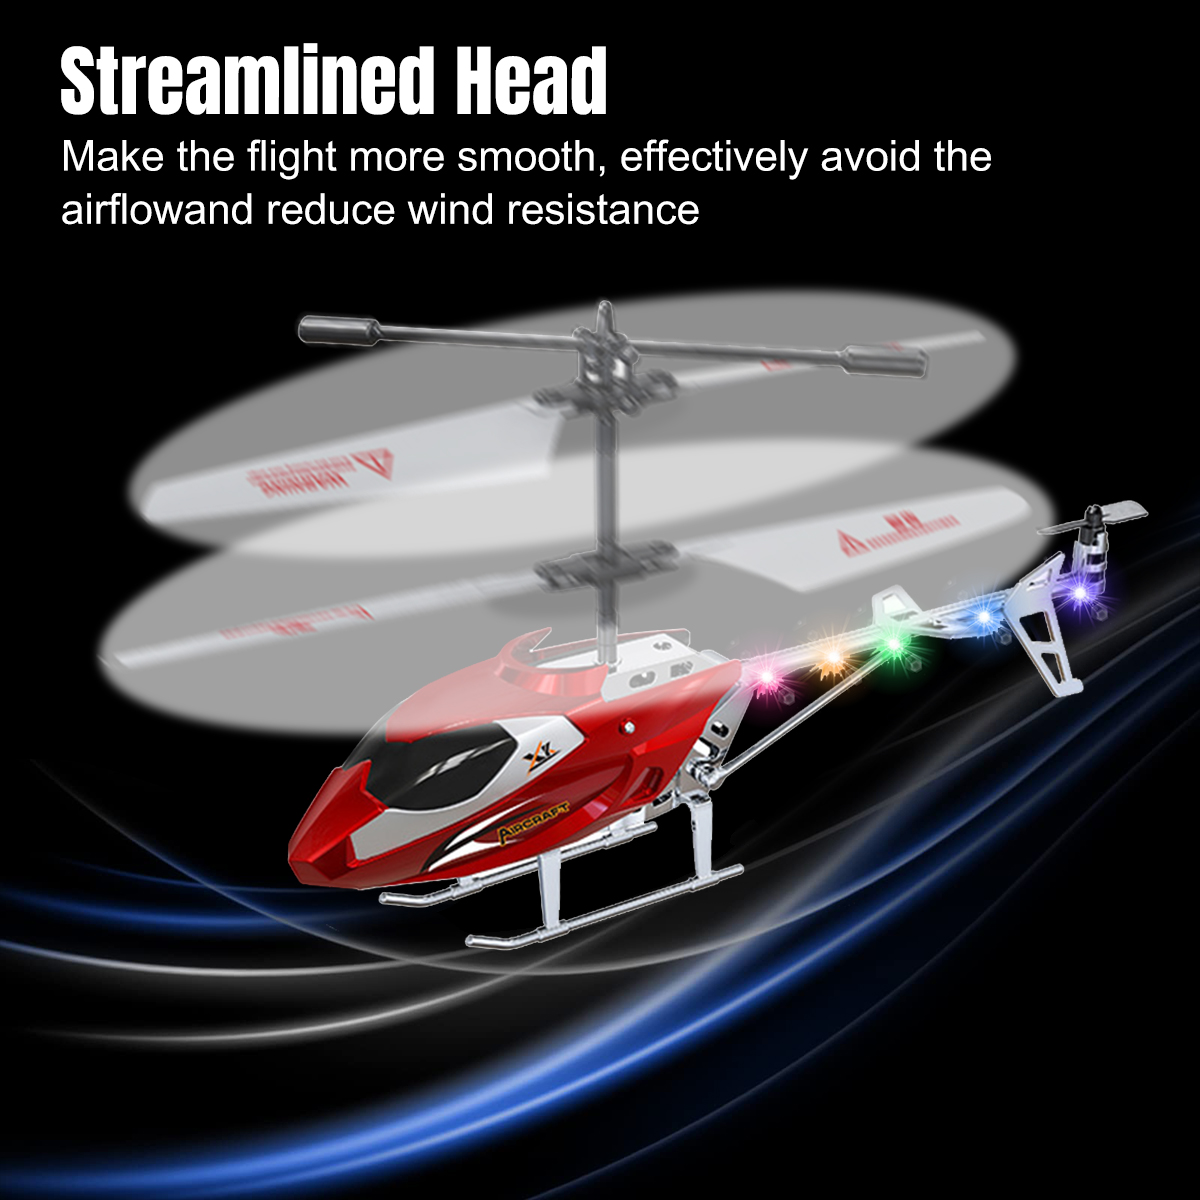 PayUSD Remote Control Helicopter Mini Gyroscope RC Helicopters LED Light for Indoor to Fly for Kids and Beginners, Red - image 5 of 8